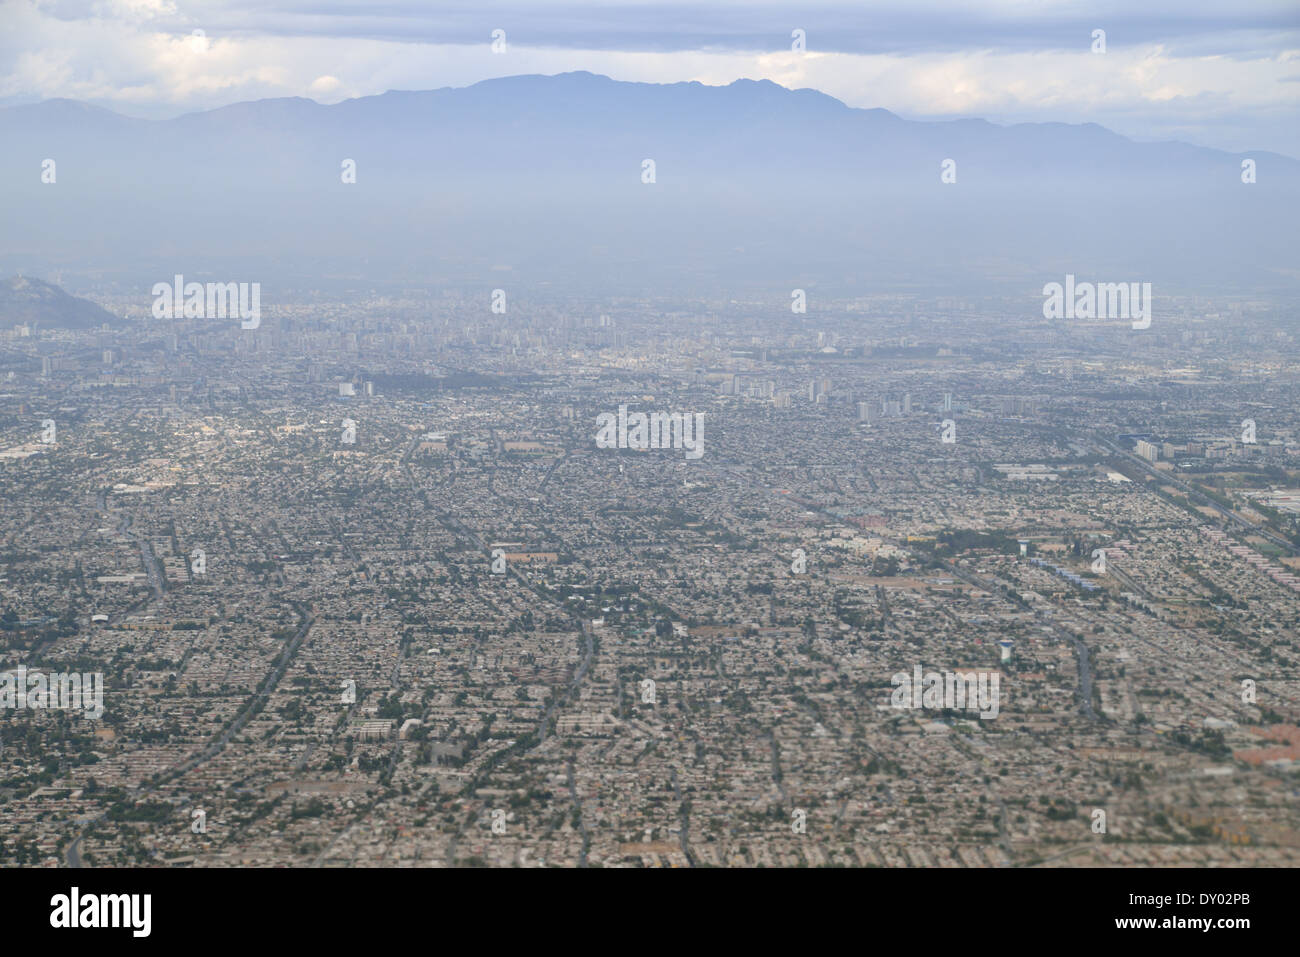 Aerial view of Santiago de Chile, South America whit mountains on background. Stock Photo